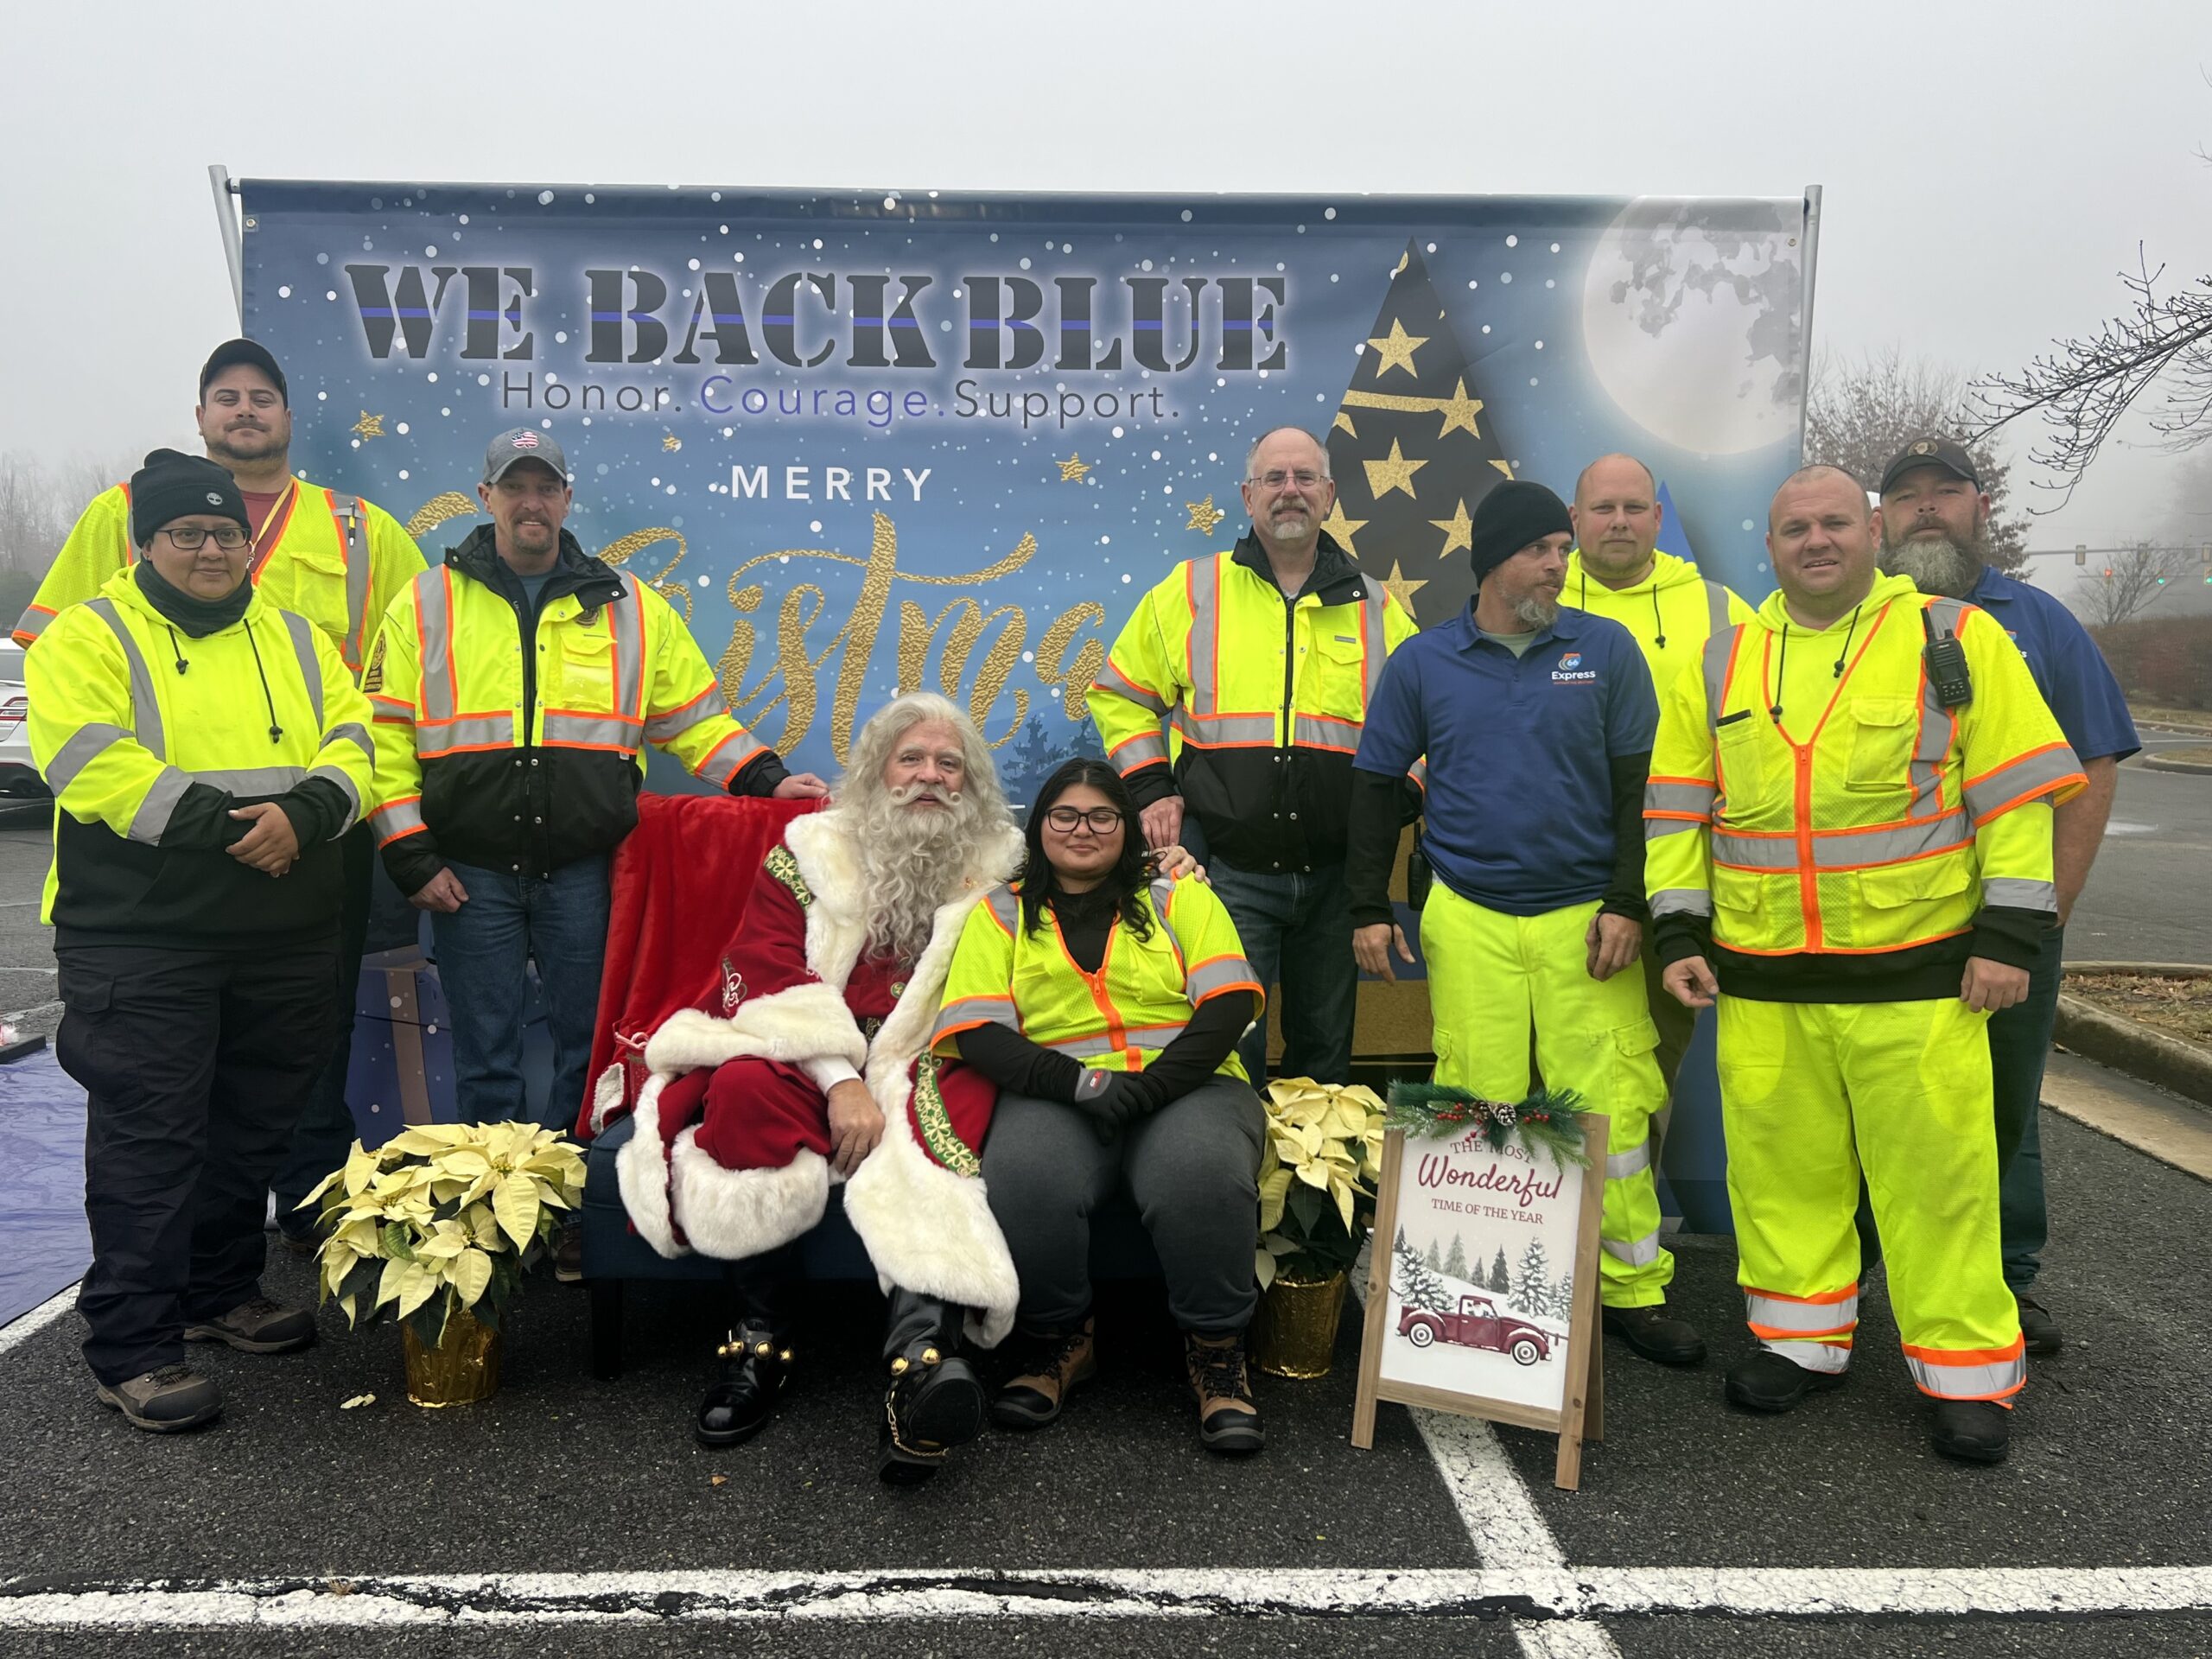 I-66 EMP Teams Up With Nonprofit Partners To Make Holidays Brighter For Families In Need